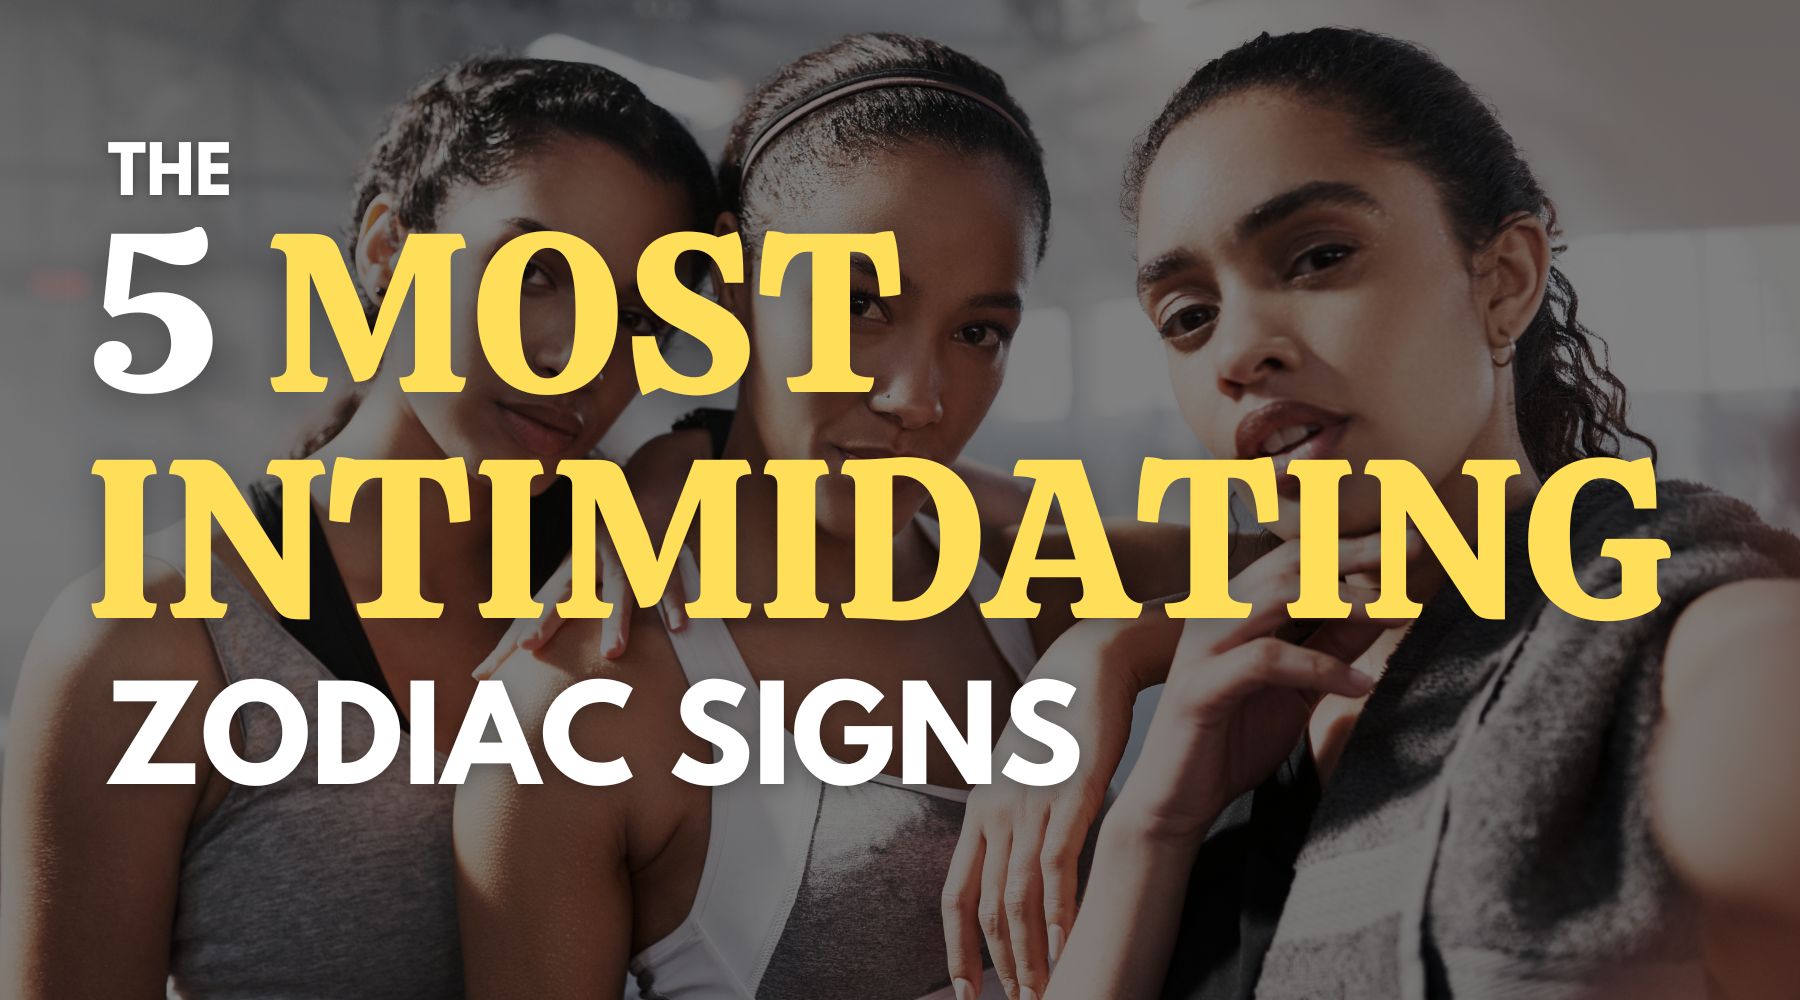 The 5 most intimidating zodiac signs and why they are intimidating to most people